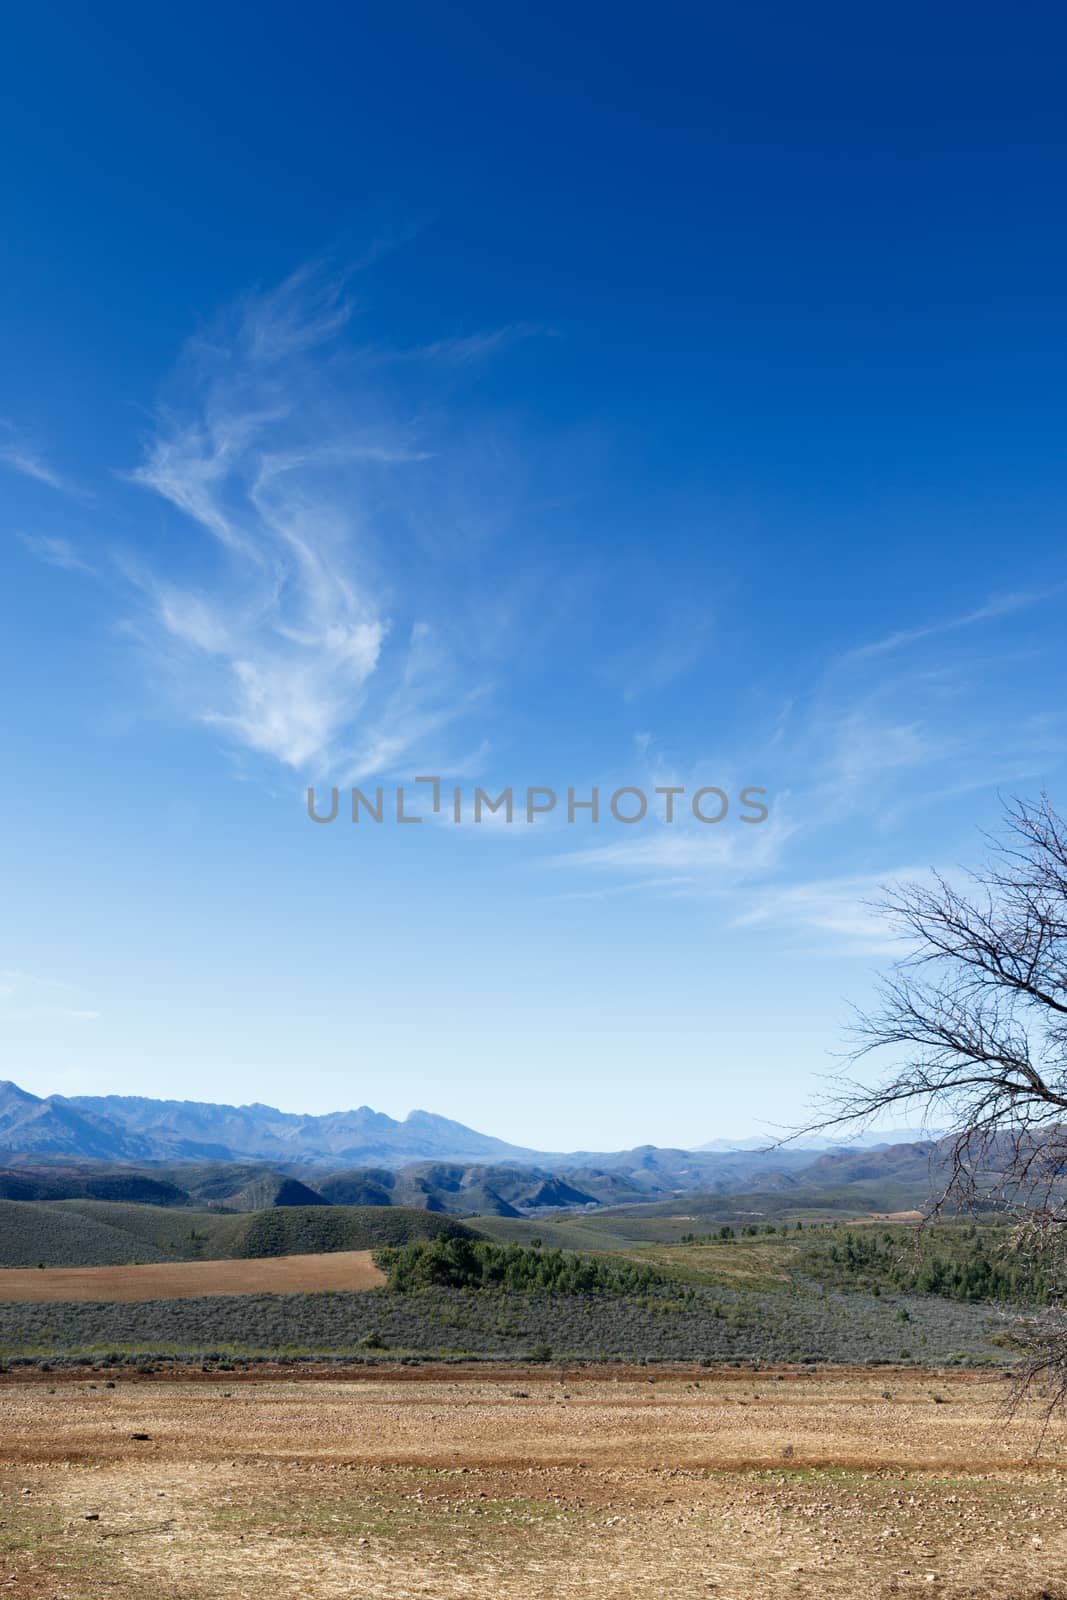 Clouds are talking - The Swartberg Nature Reserve by markdescande